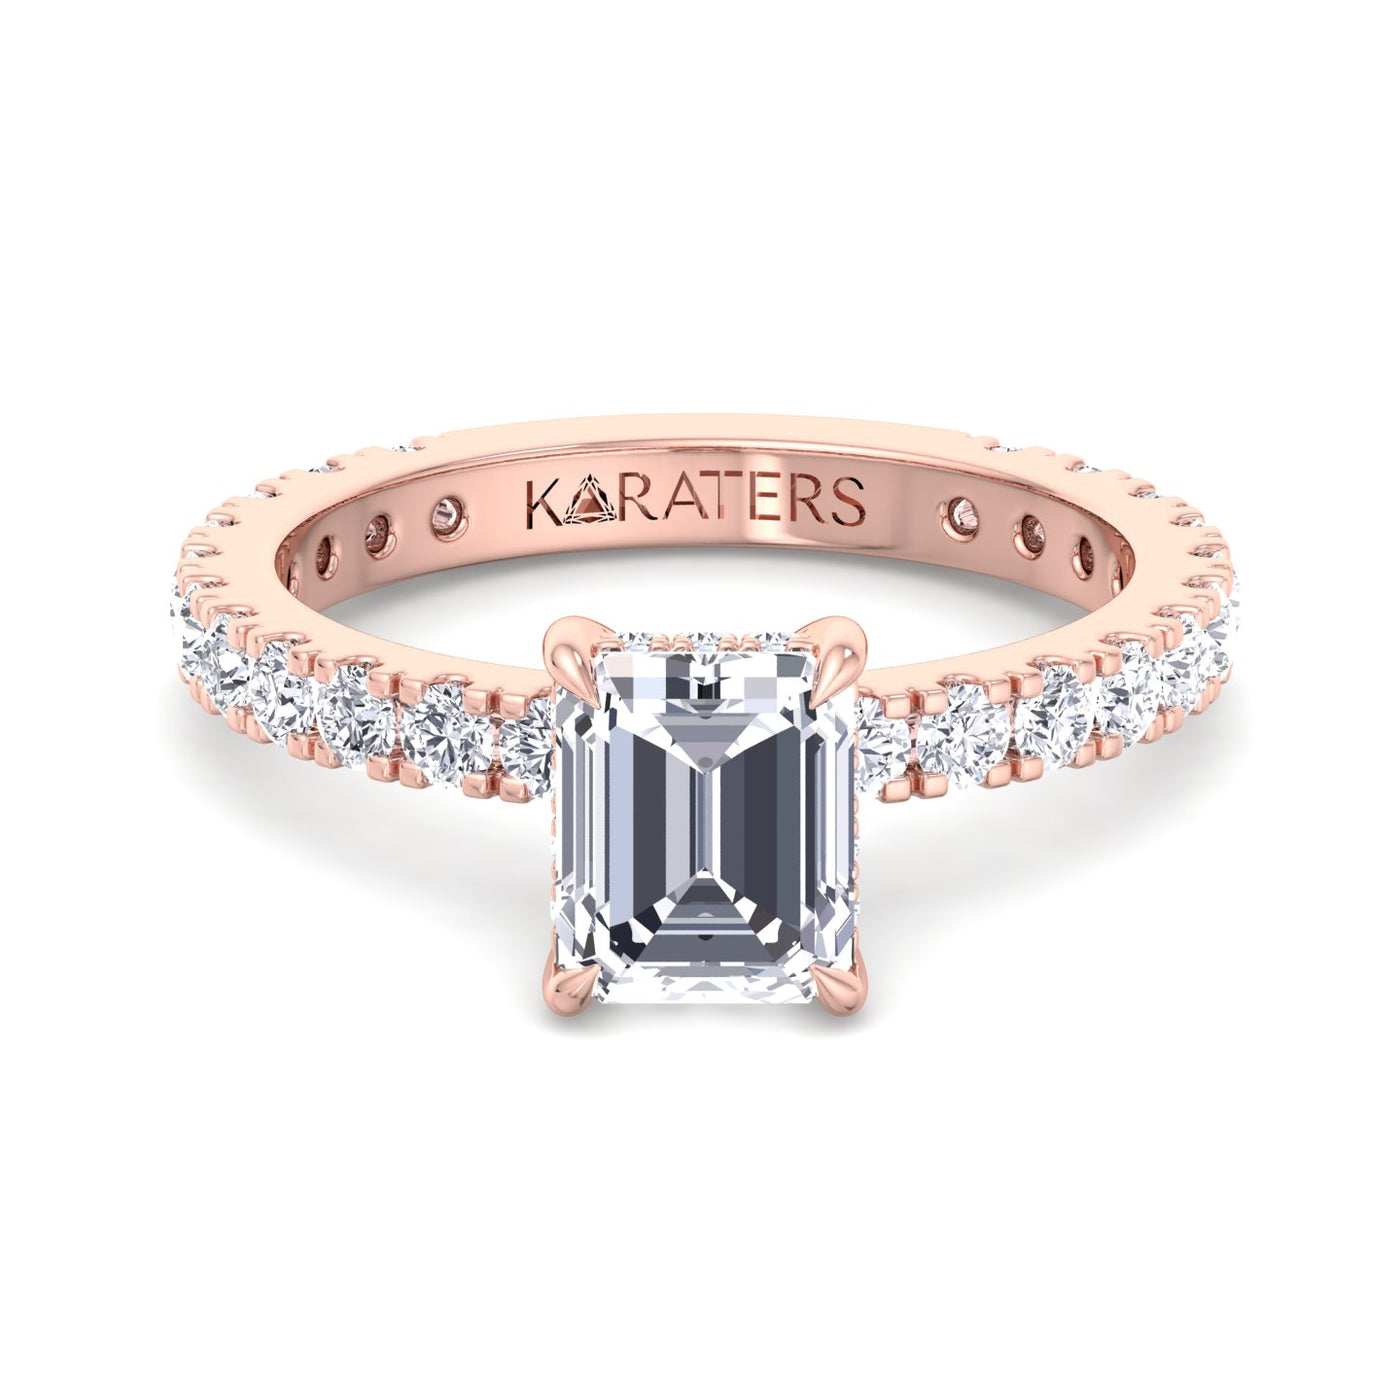 emerald-cut-lab-grown-diamond-engagement-ring-with-hidden-halo-side-stones-in-solid-rose-gold-band